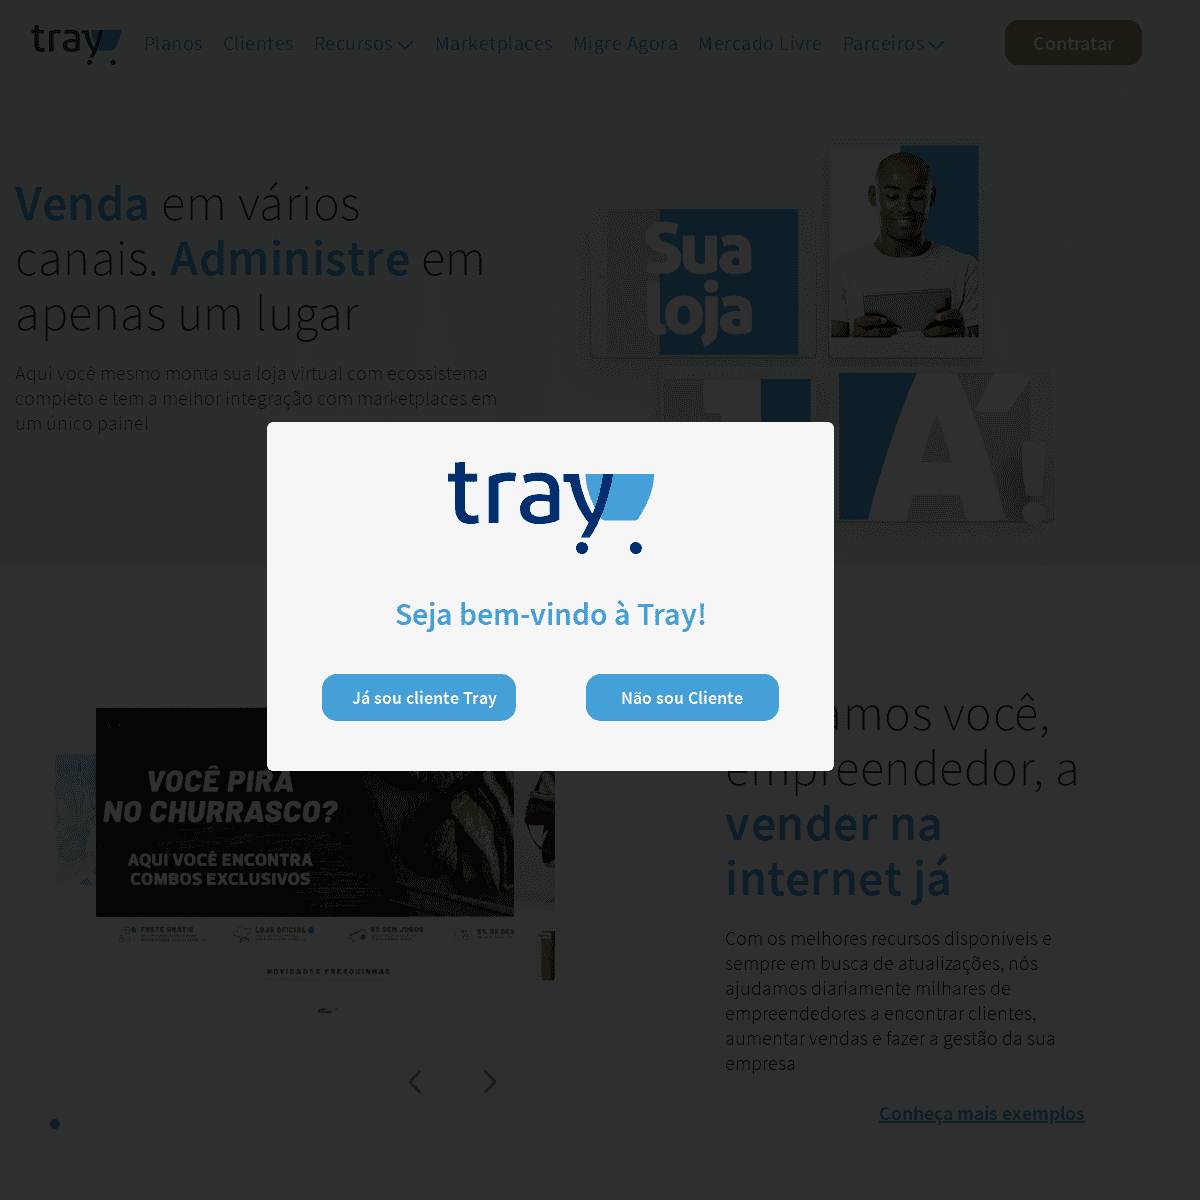 A complete backup of https://tray.com.br